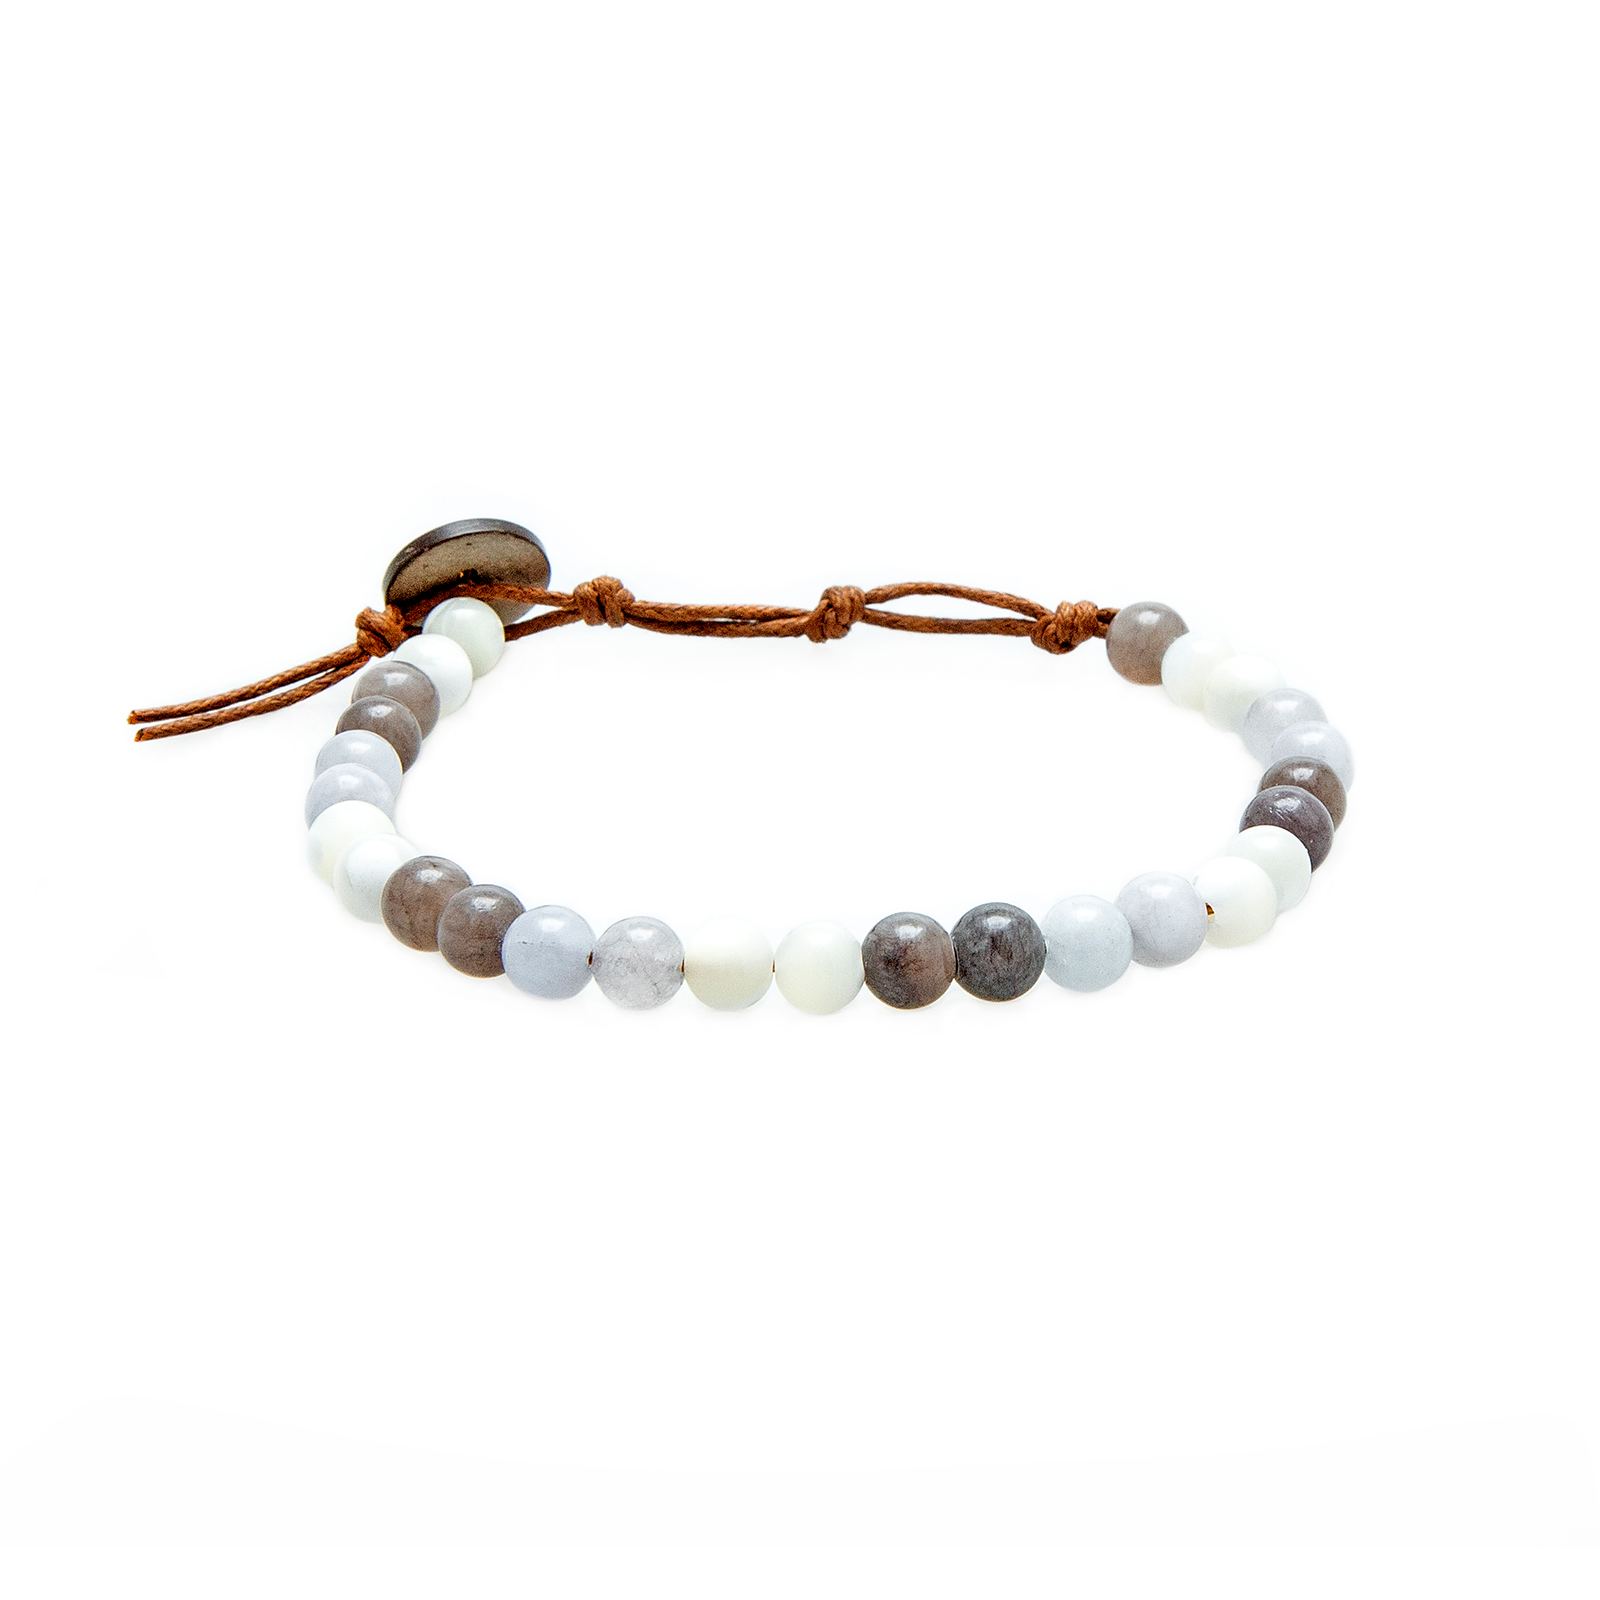 White and Grey Healing Bracelet with Cotton Cord